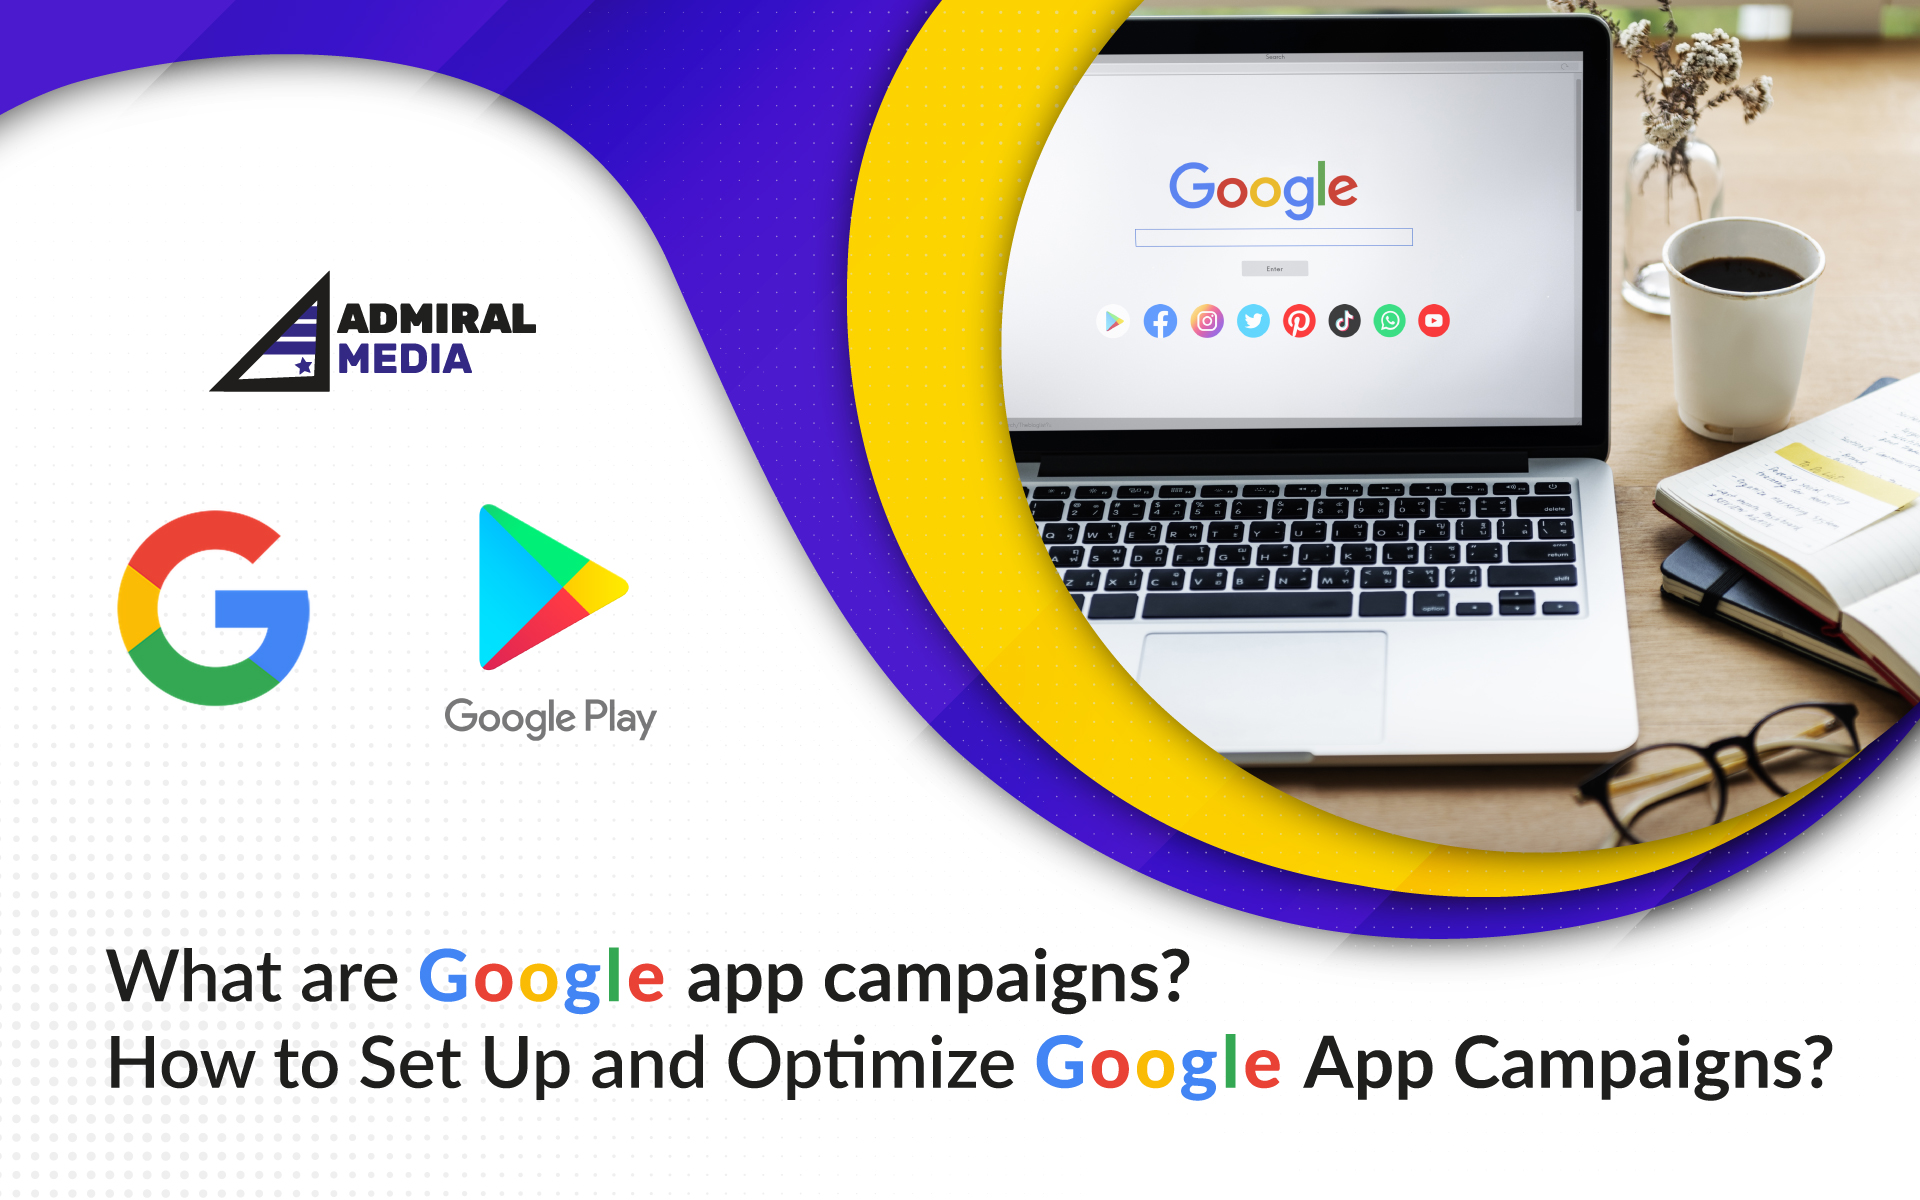 How to Set Up and Optimize Google App Campaigns